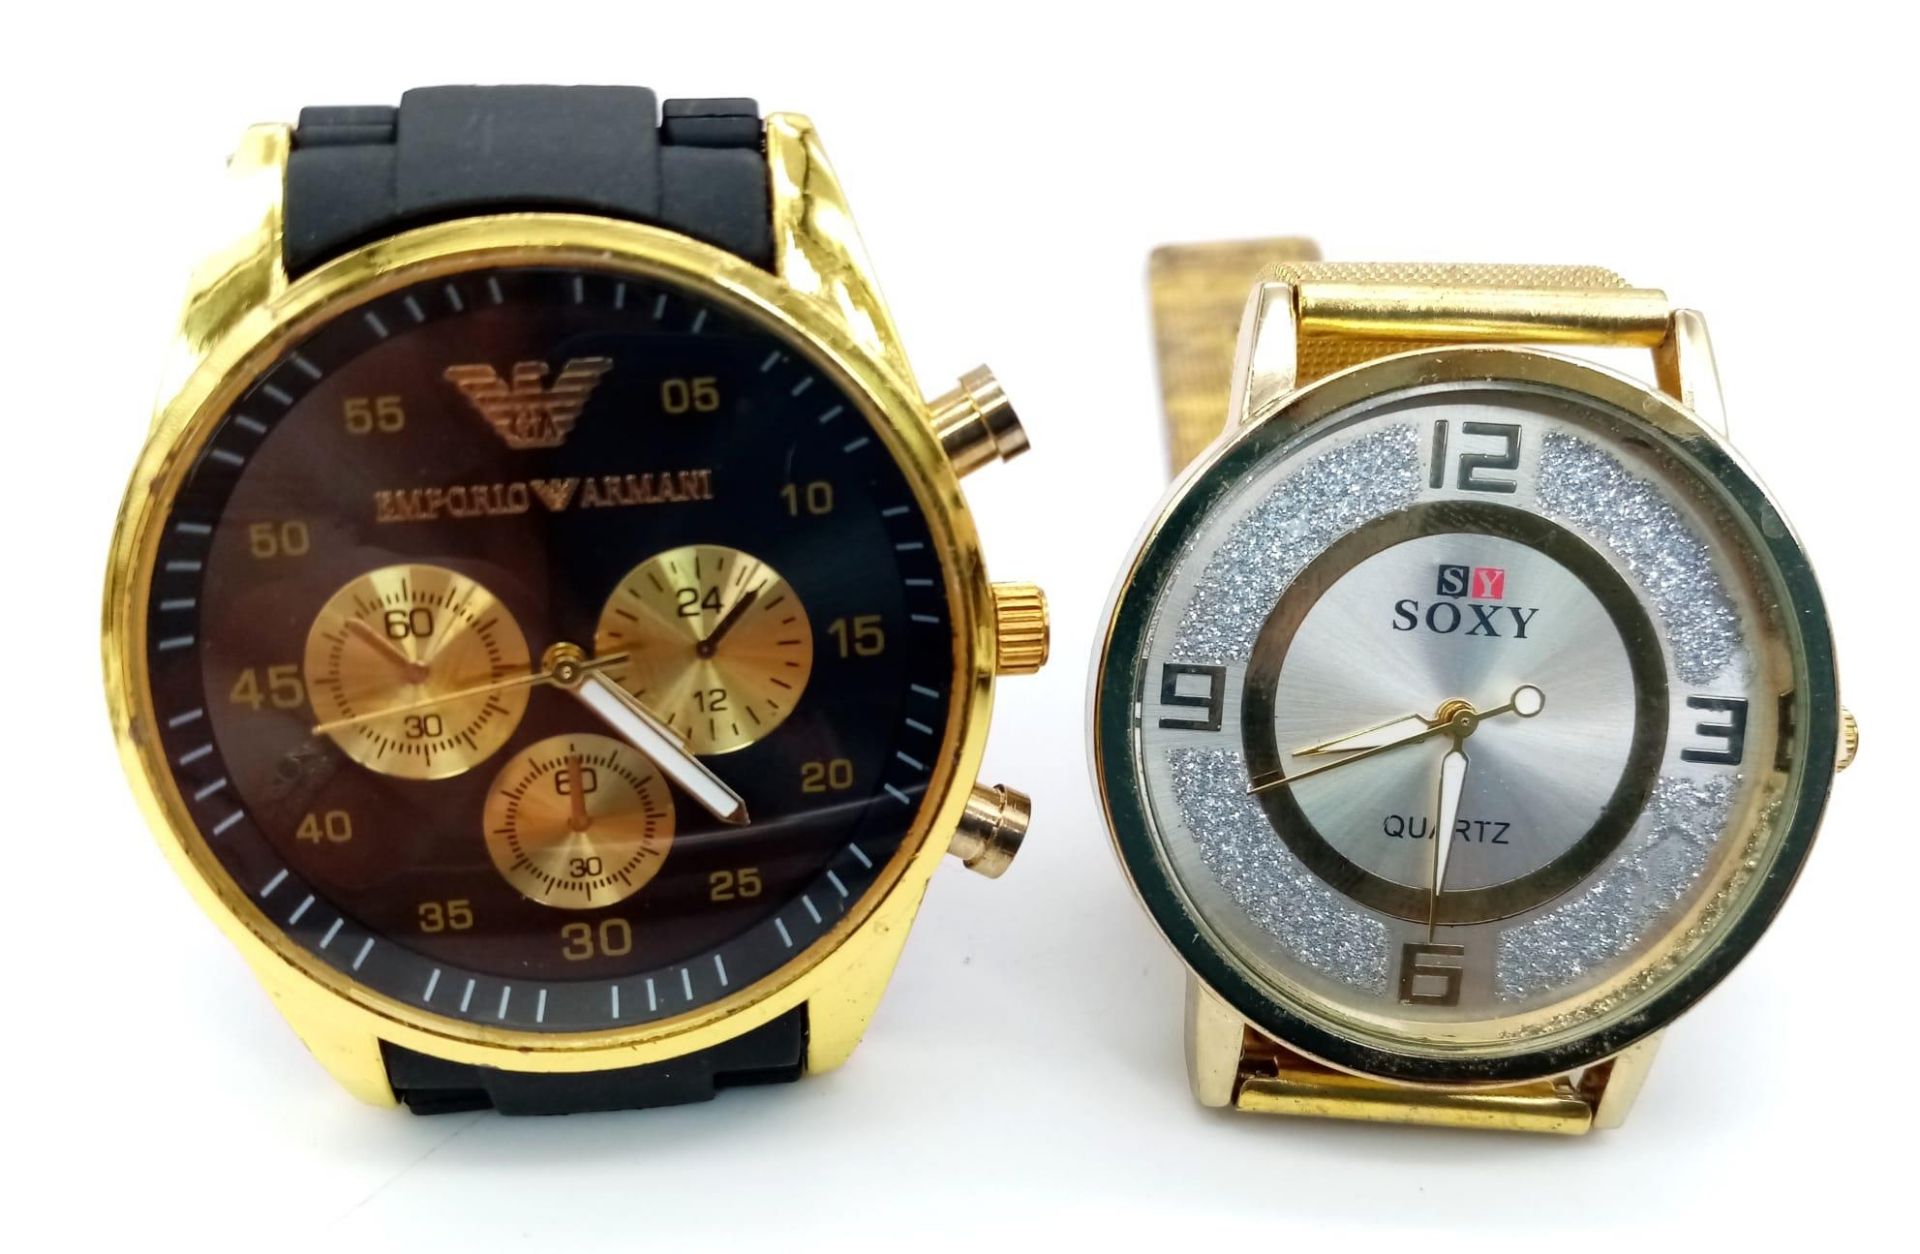 SELECTION OF 5 WATCHES MARKED AS EMPORIO ARMANI, GENEVA, RED HERRING, SOXY & LTD WATCH AF - Image 2 of 5